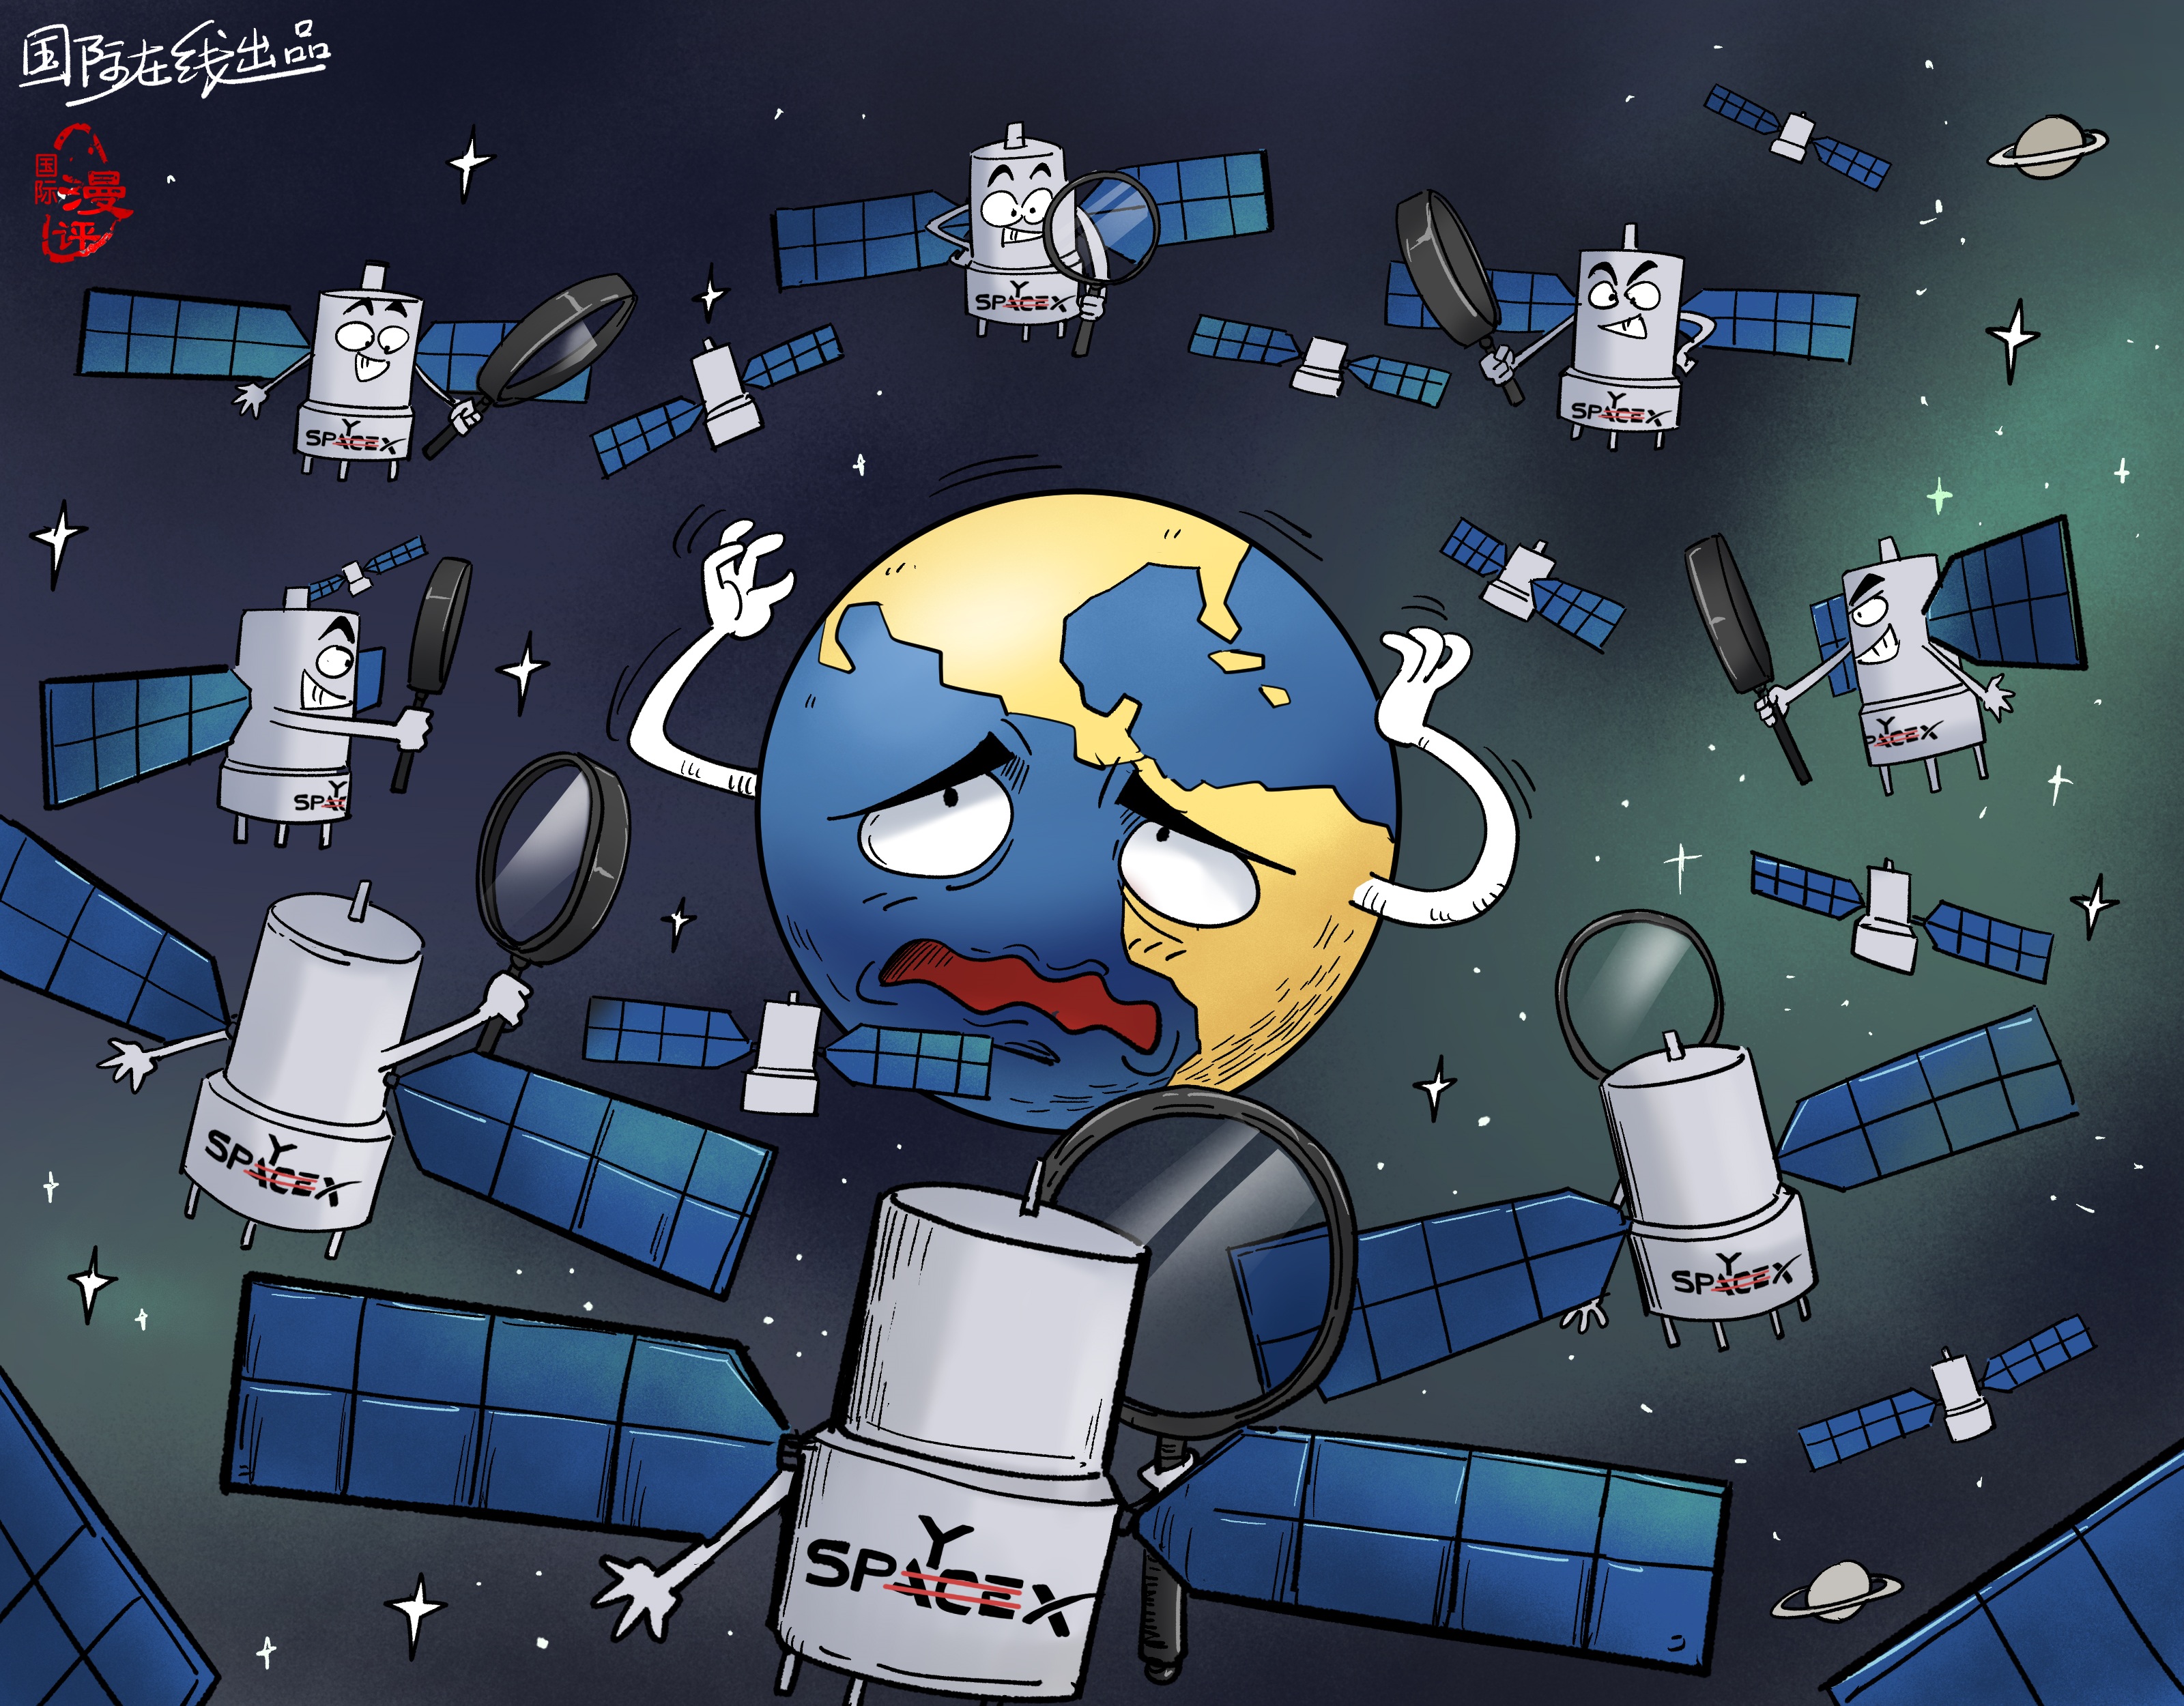 【Editorial Cartoon】SpaceX or SpyX?_fororder_9709e476-9d2a-4aff-a874-ee610df7dc49